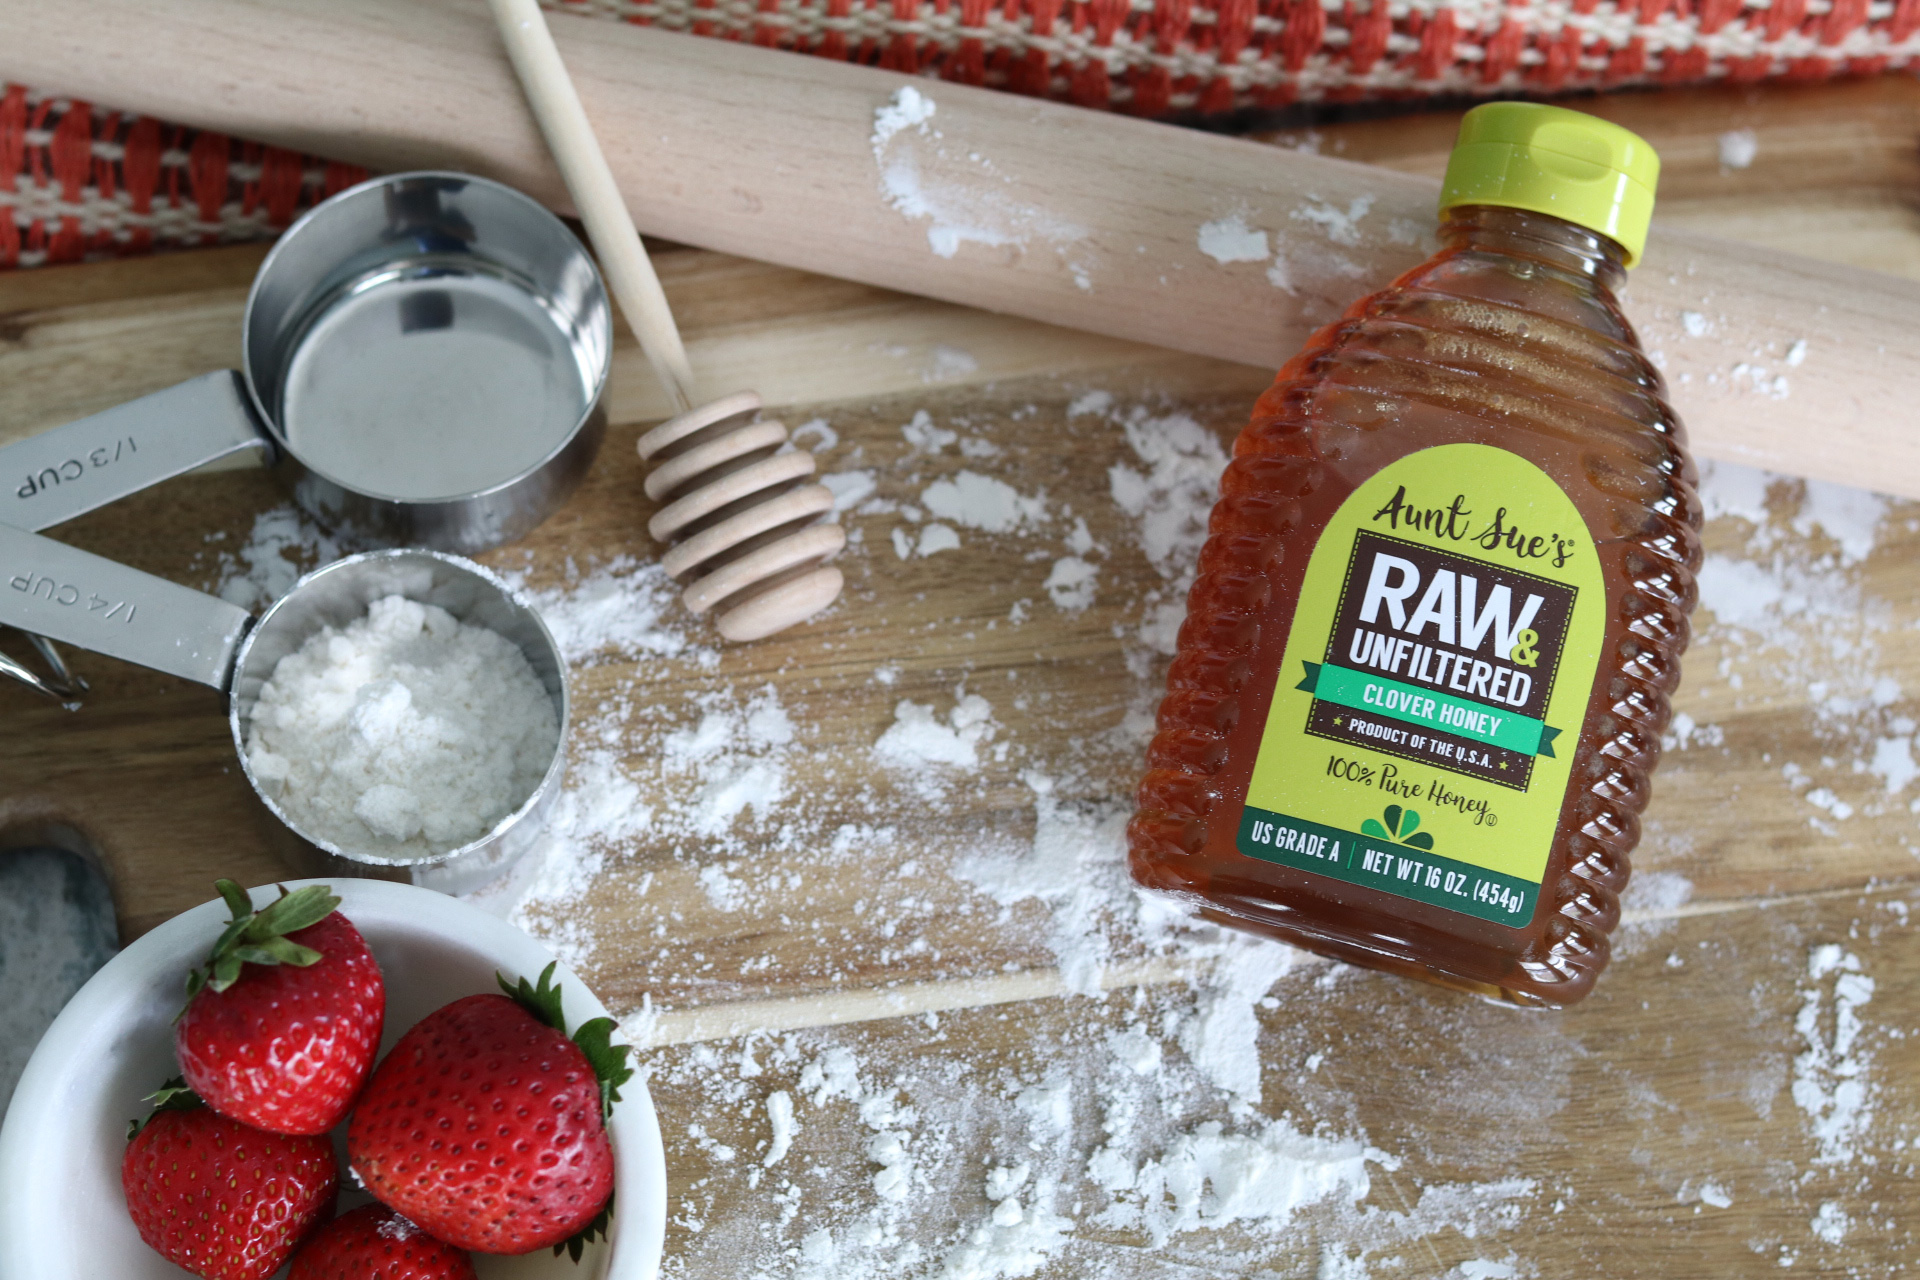 Aunt Sue's Raw & Unfiltered Honey with Baking Supplies